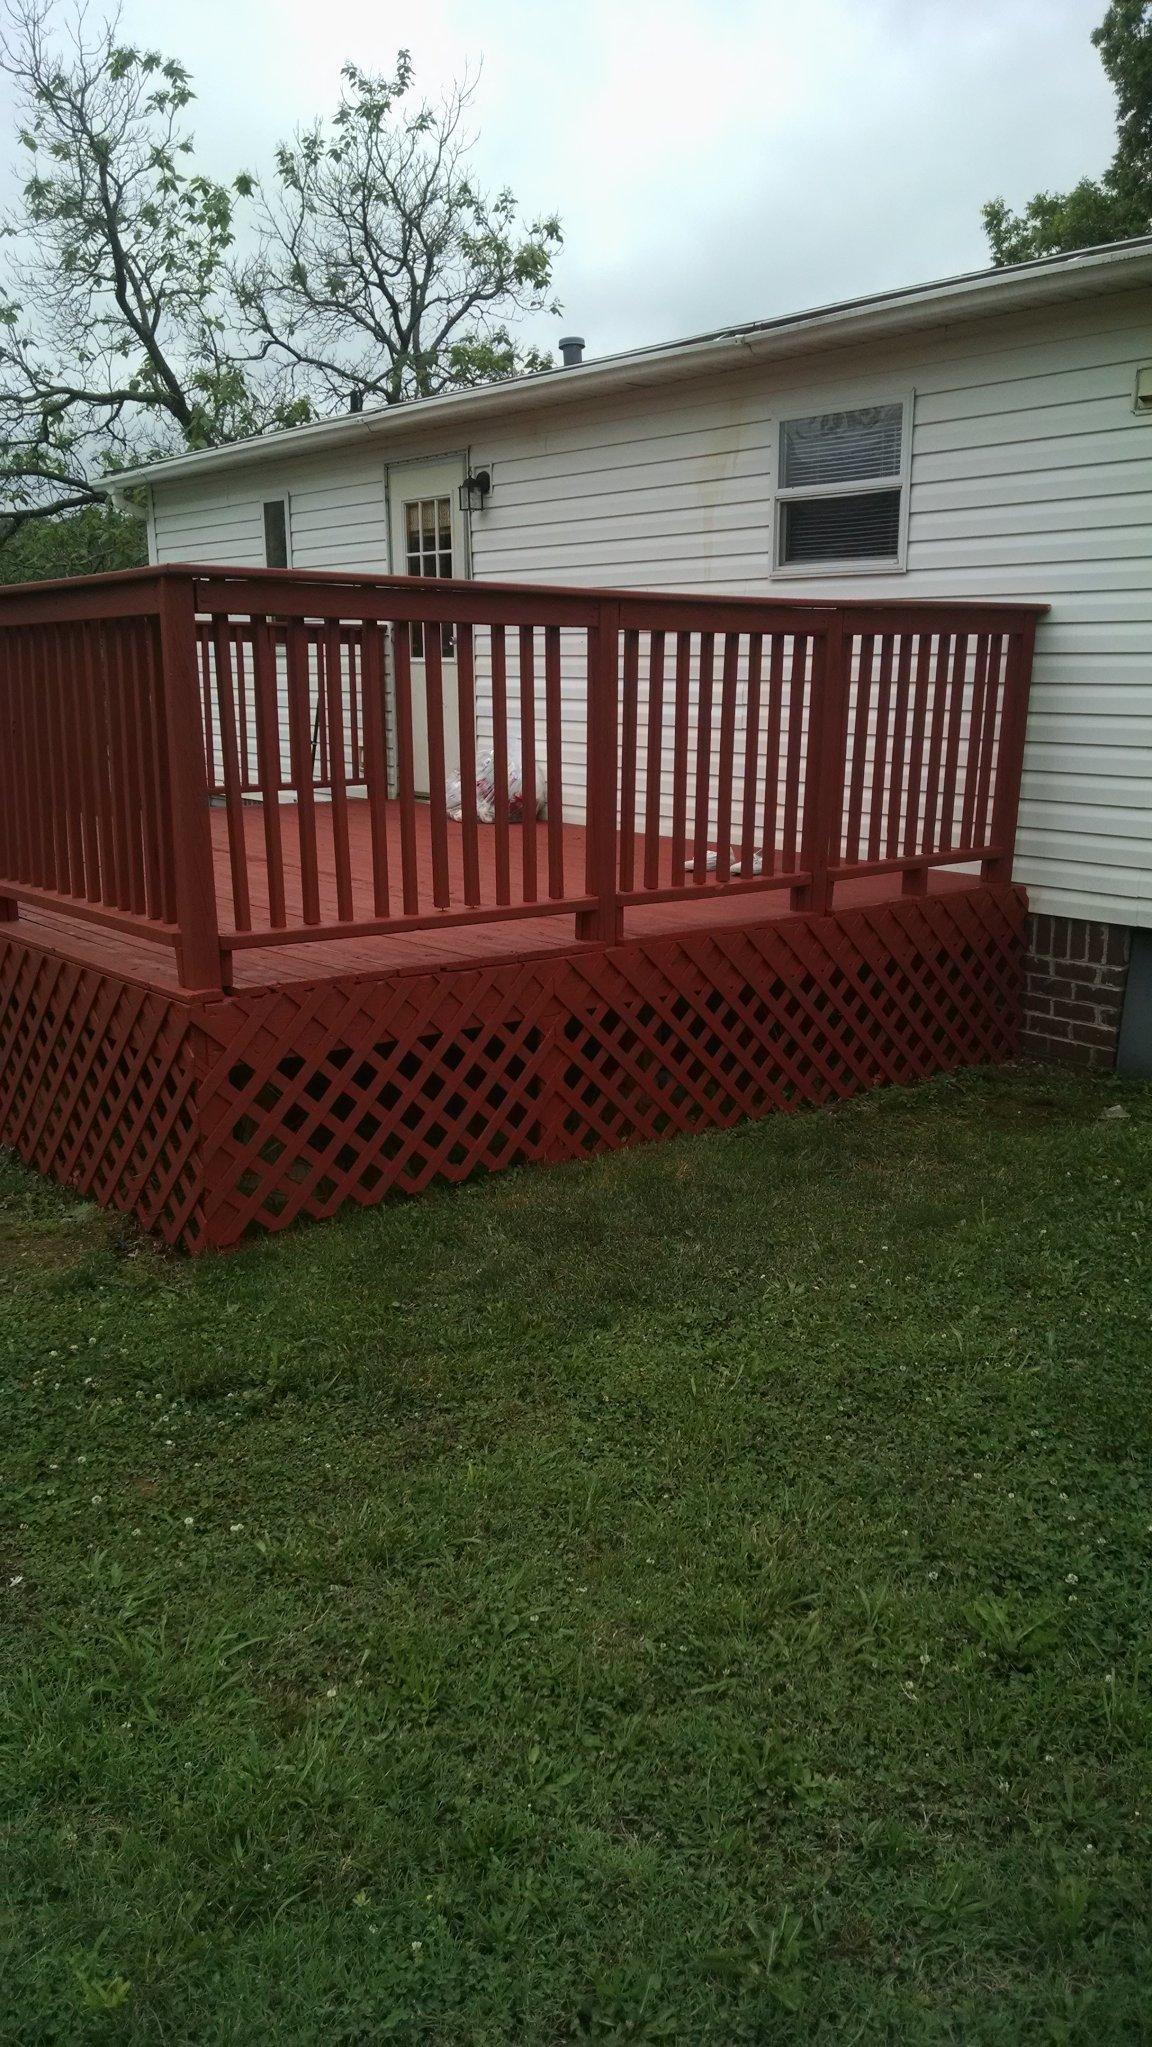 This was an existing deck that needed some TLC from M&M 